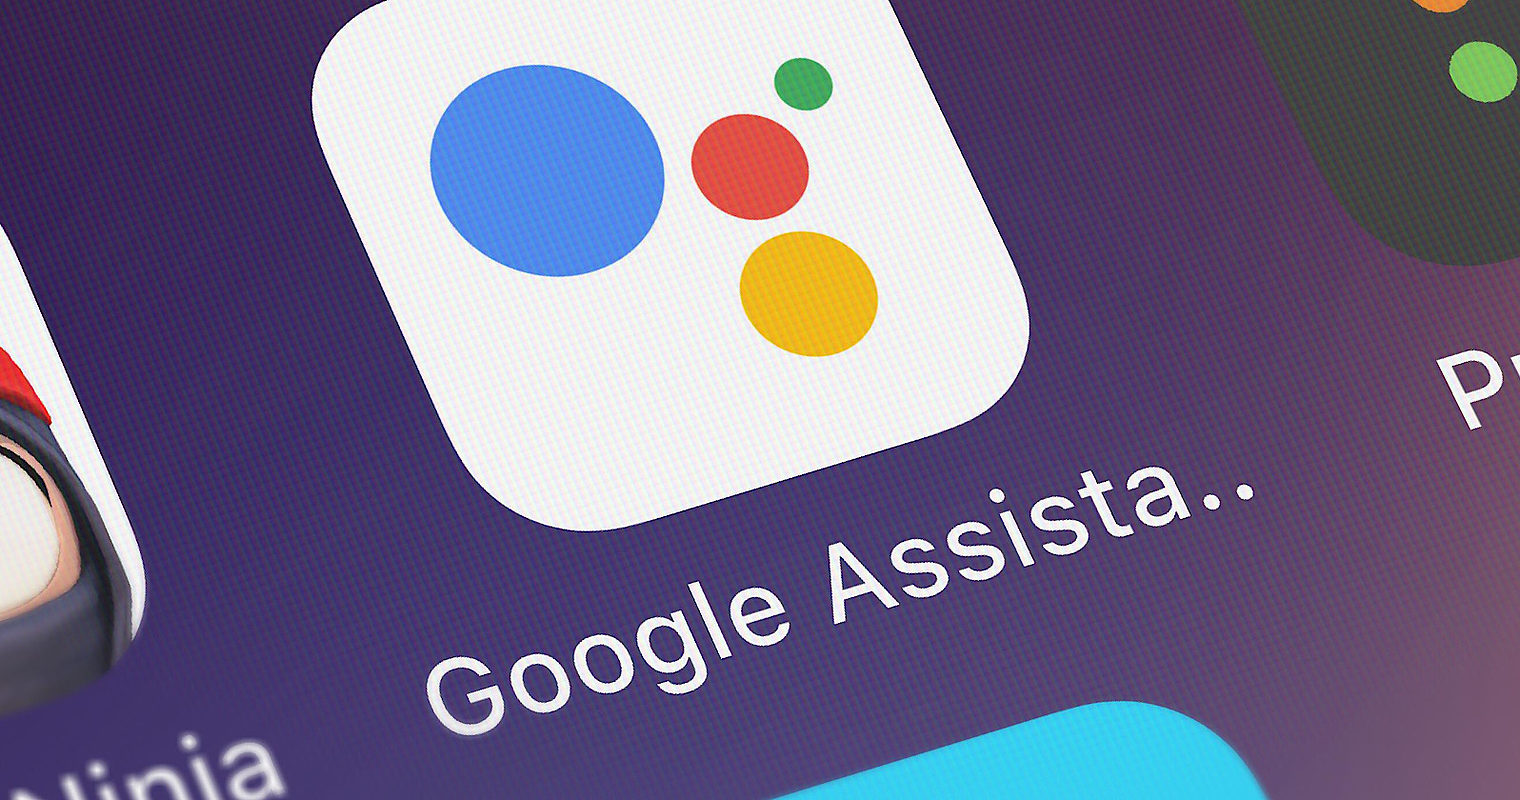 Google Assistant Now Has 500 Million Users Worldwide